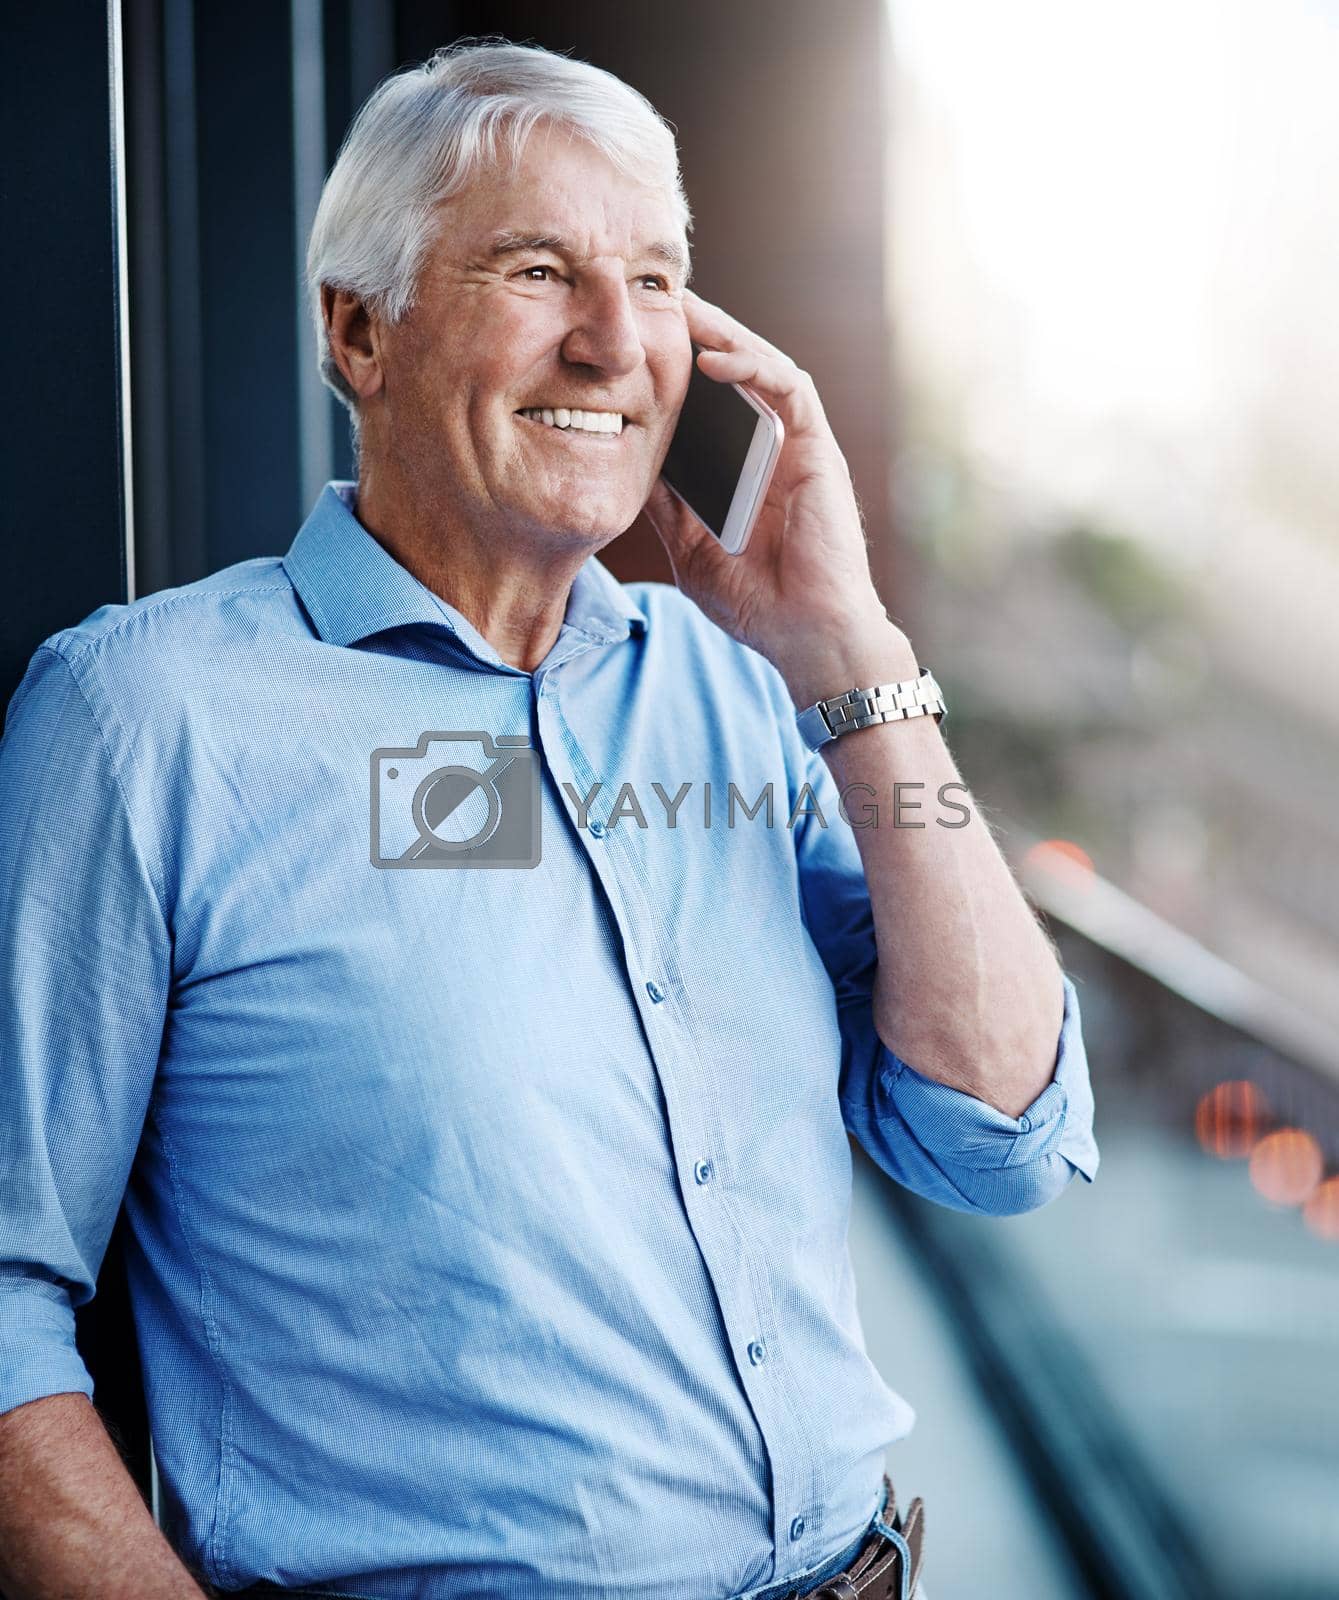 Royalty free image of Hes become an expert in talking to clients. a senior businessman on a call outside the office. by YuriArcurs